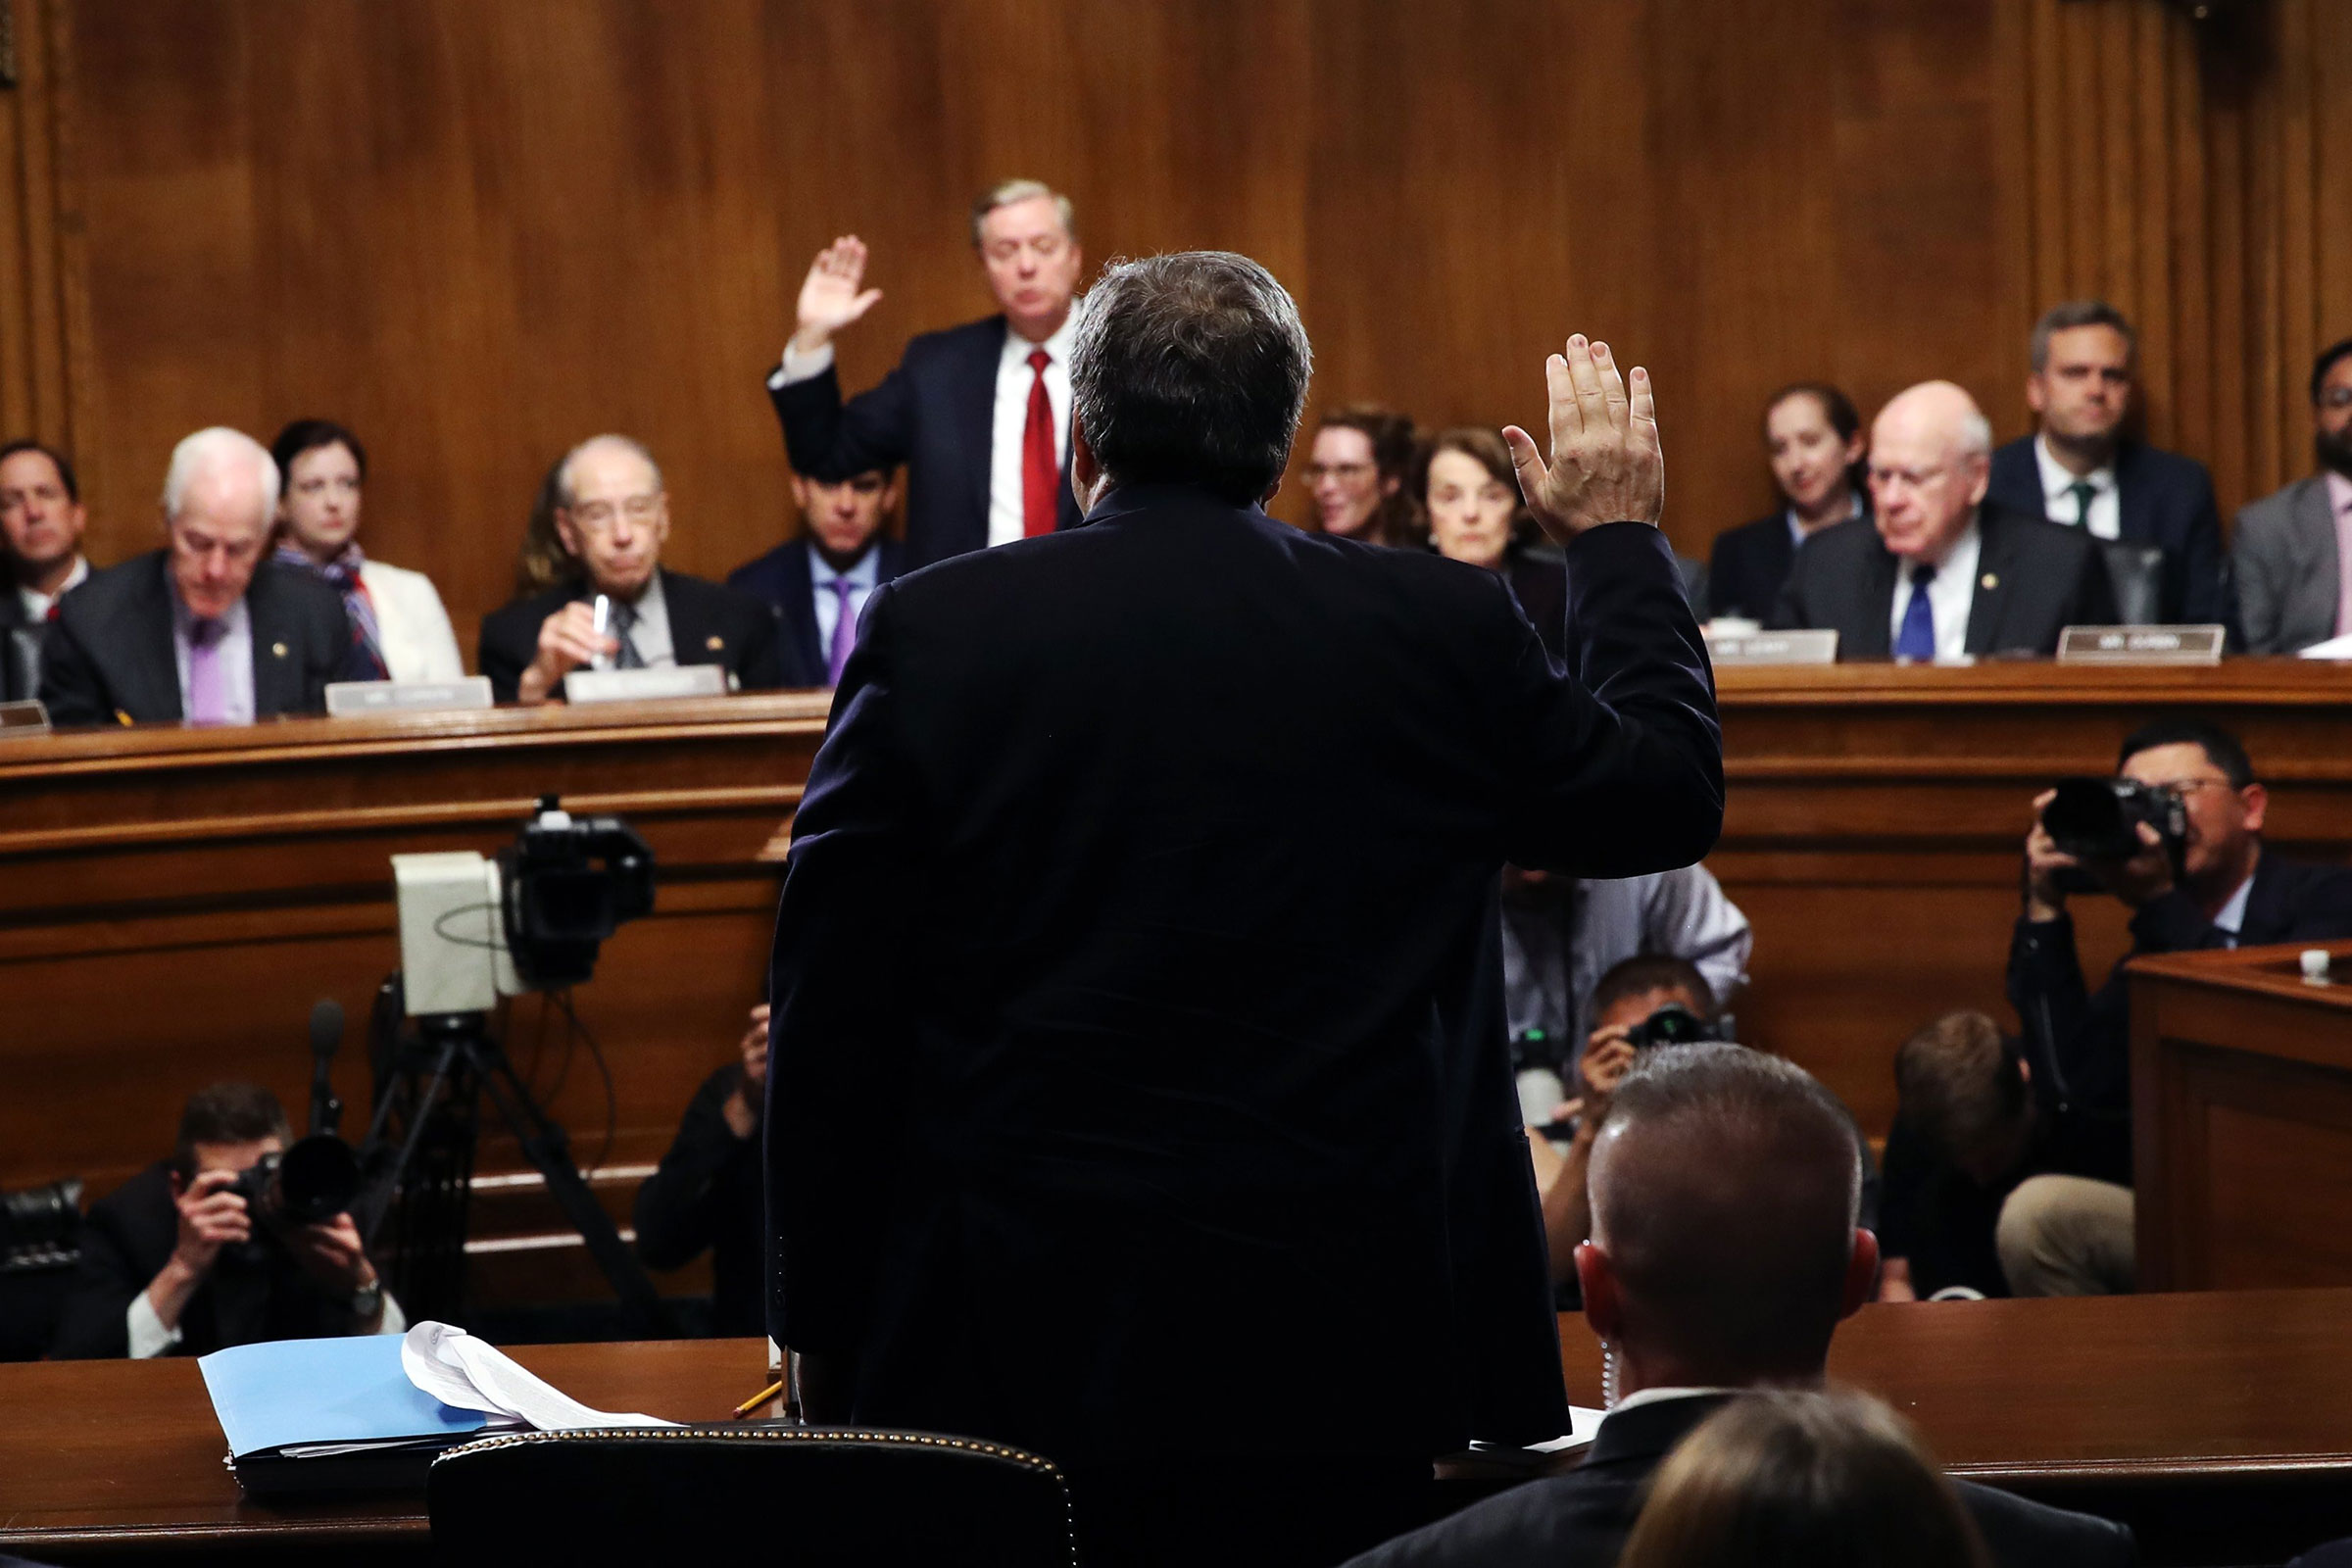 Attorney General William Barr is sworn in to testify about the Mueller report before the Senate on May 1 (Win McNamee—Getty Images)